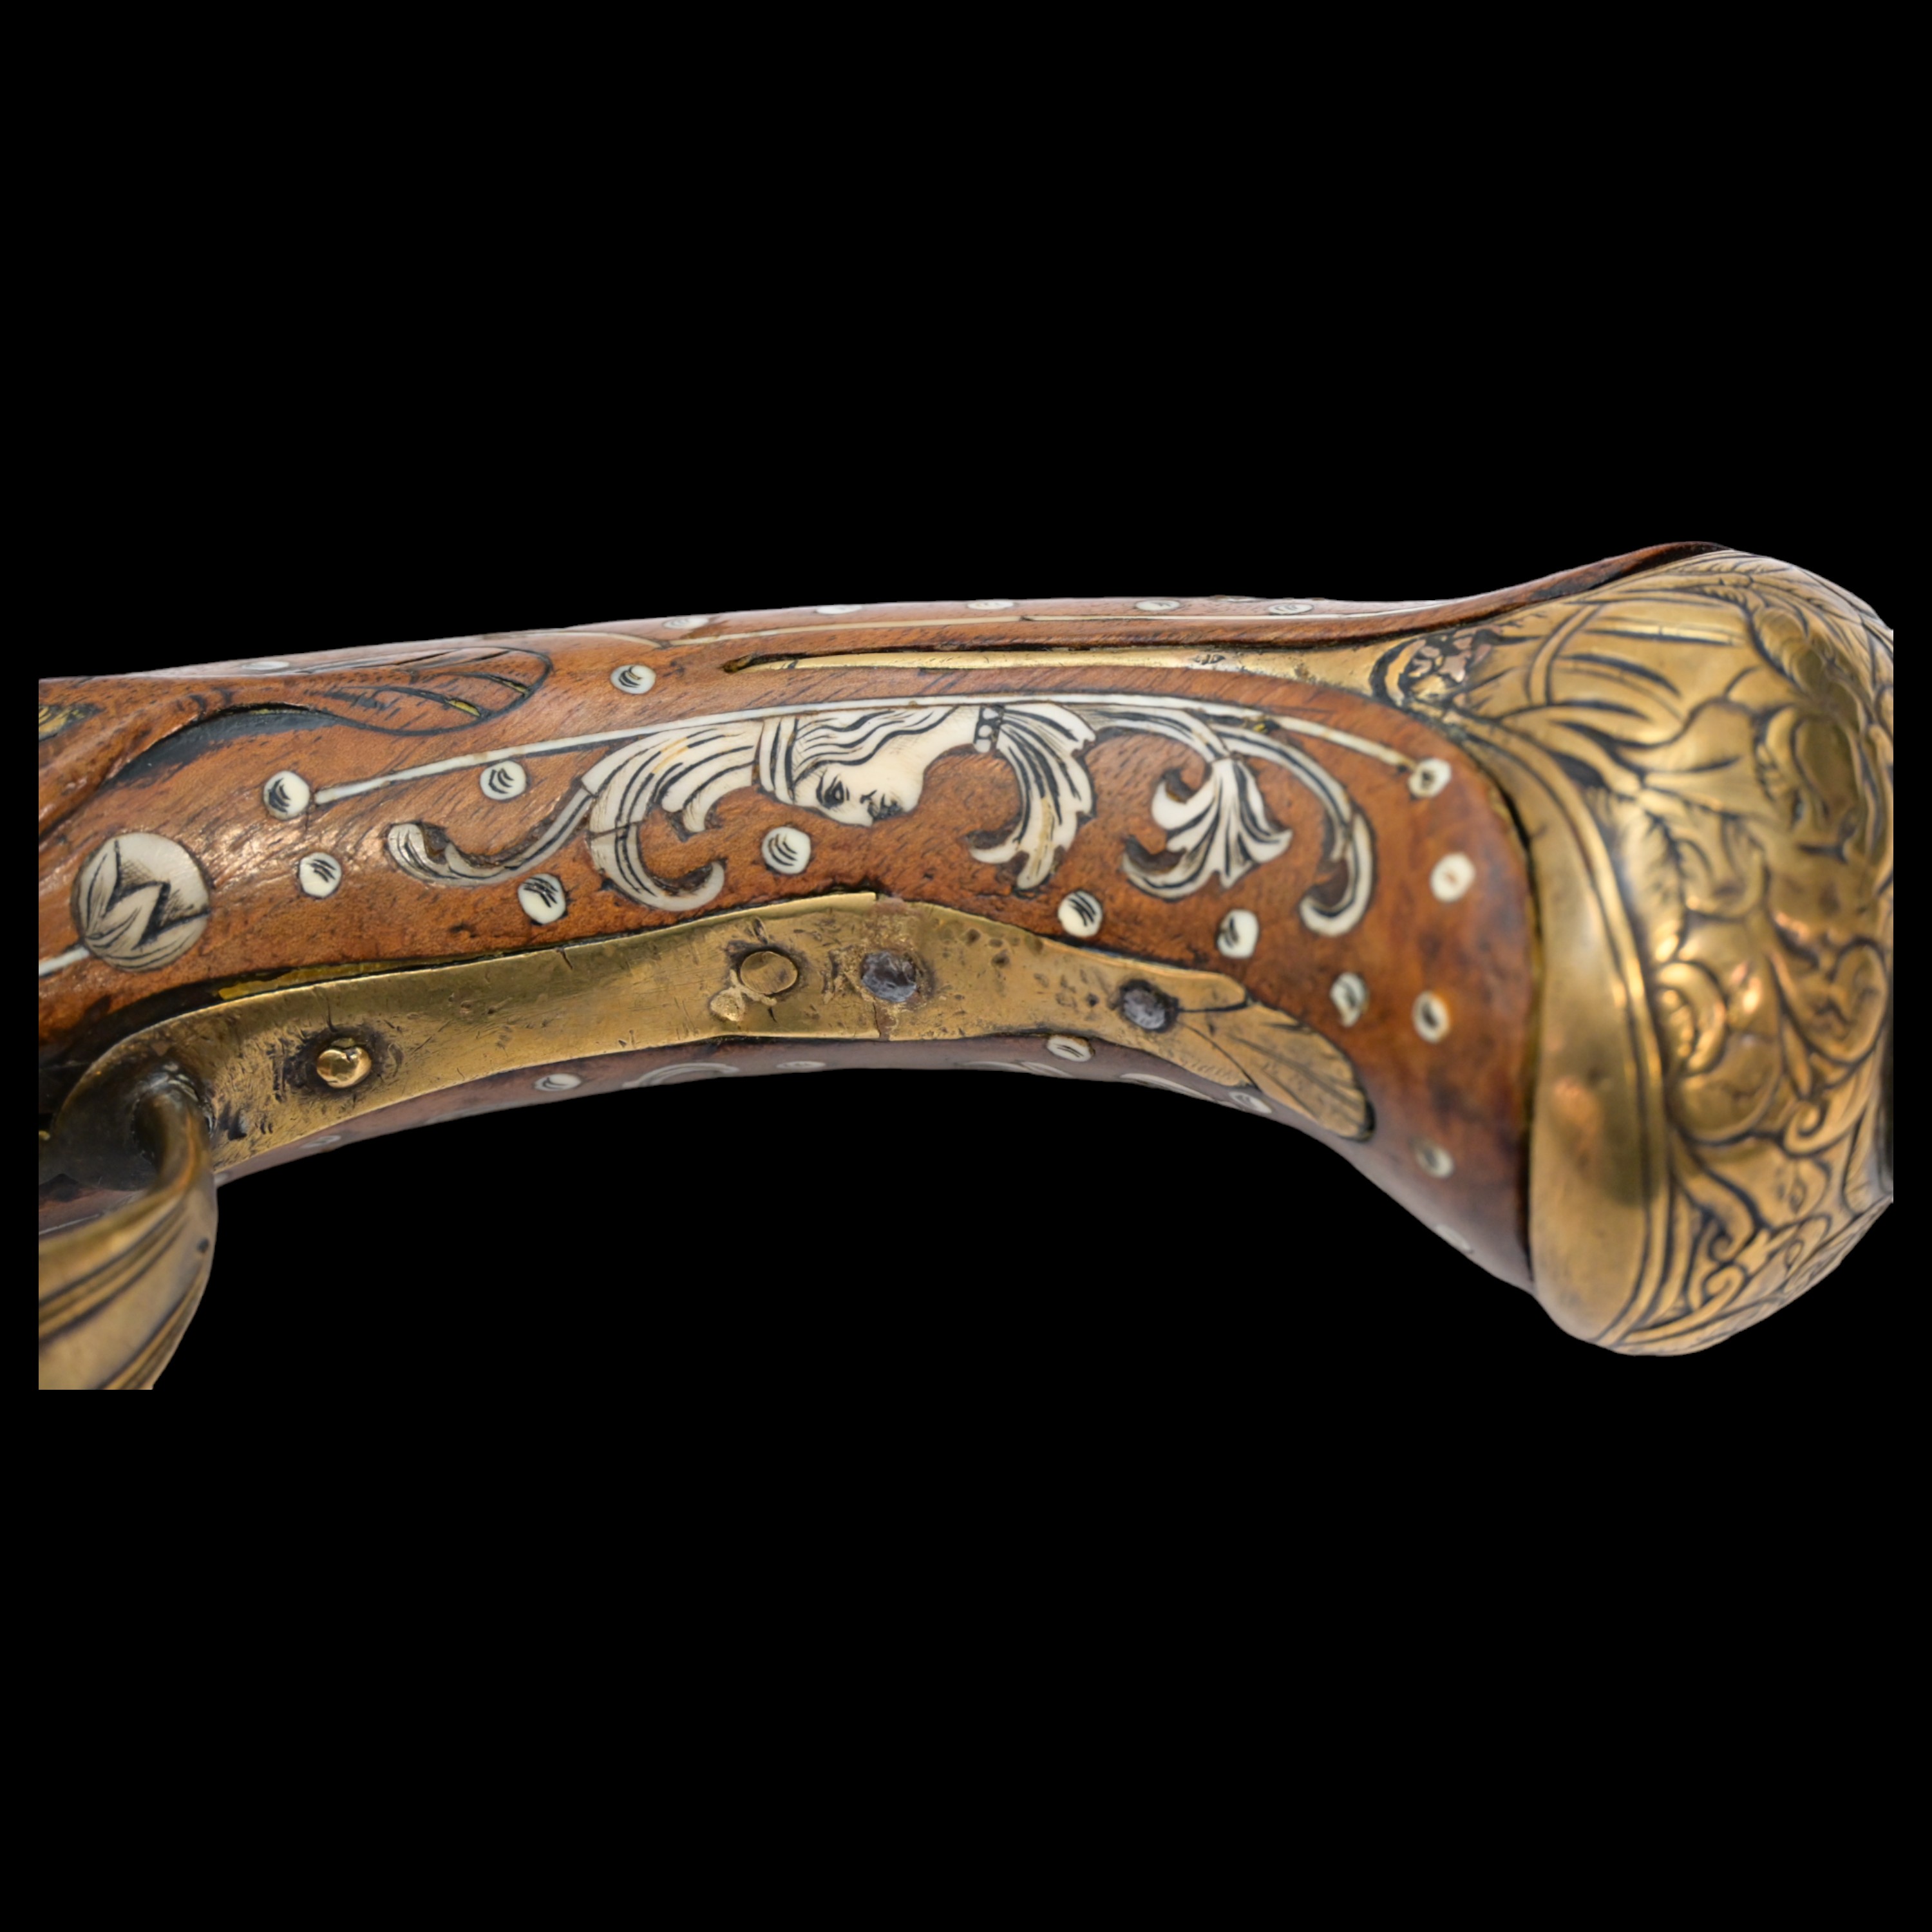 Rare, Richly decorated with inlay, flintlock pistol, Germany, last quarter of the 17th century. - Image 7 of 12